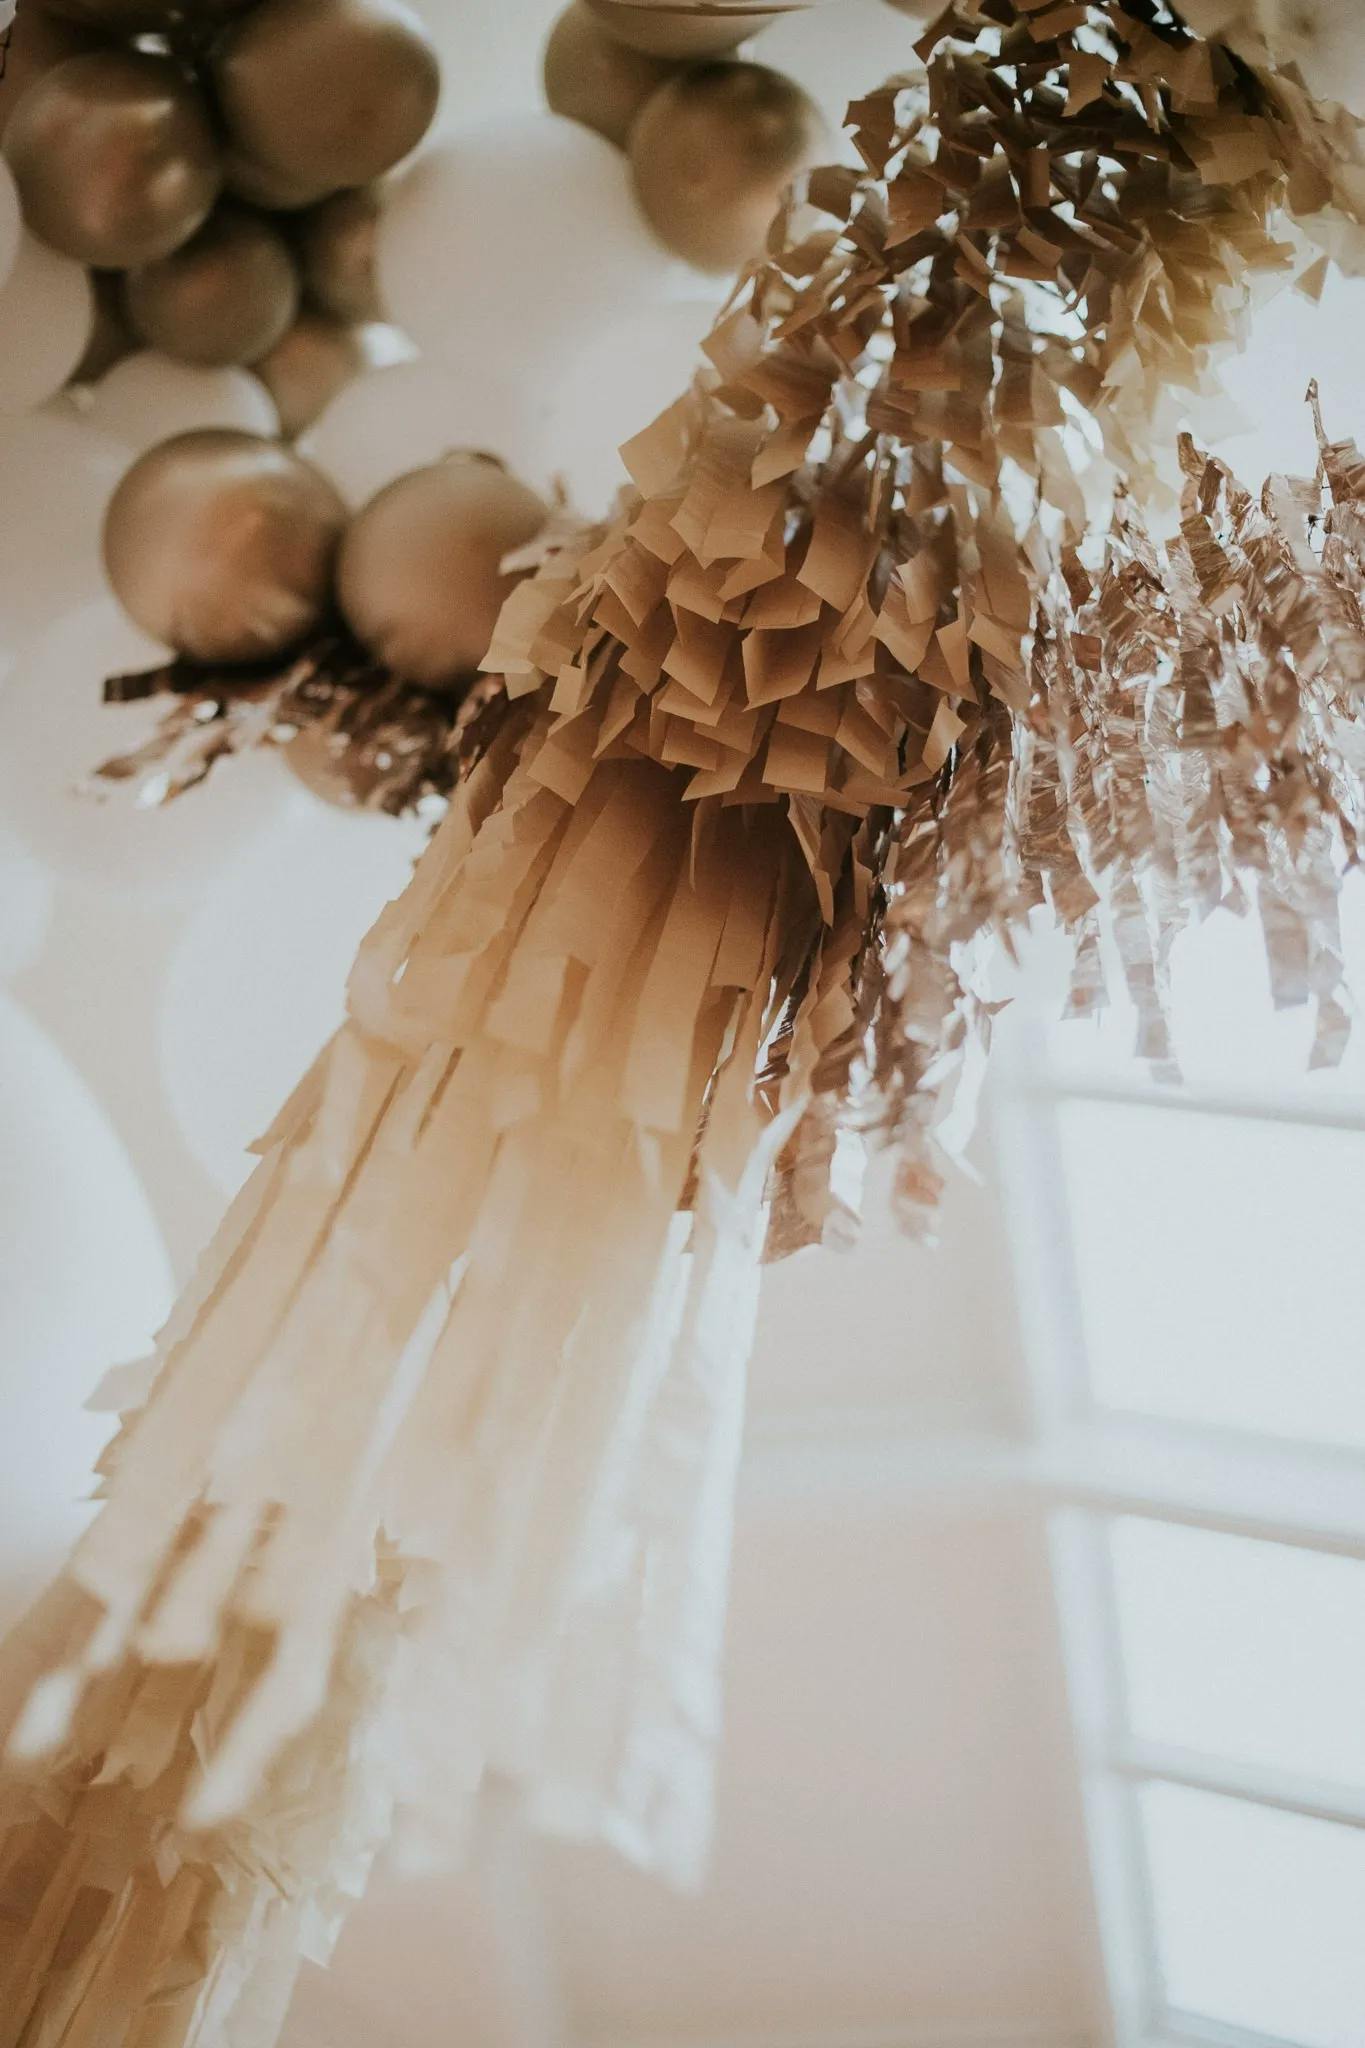 Close-up view of a decorative hanging installation featuring cascading beige and golden fringed paper. In the background, several inflated gold balloons can be seen against a softly lit, out-of-focus backdrop. The setup evokes a festive and elegant ambiance.